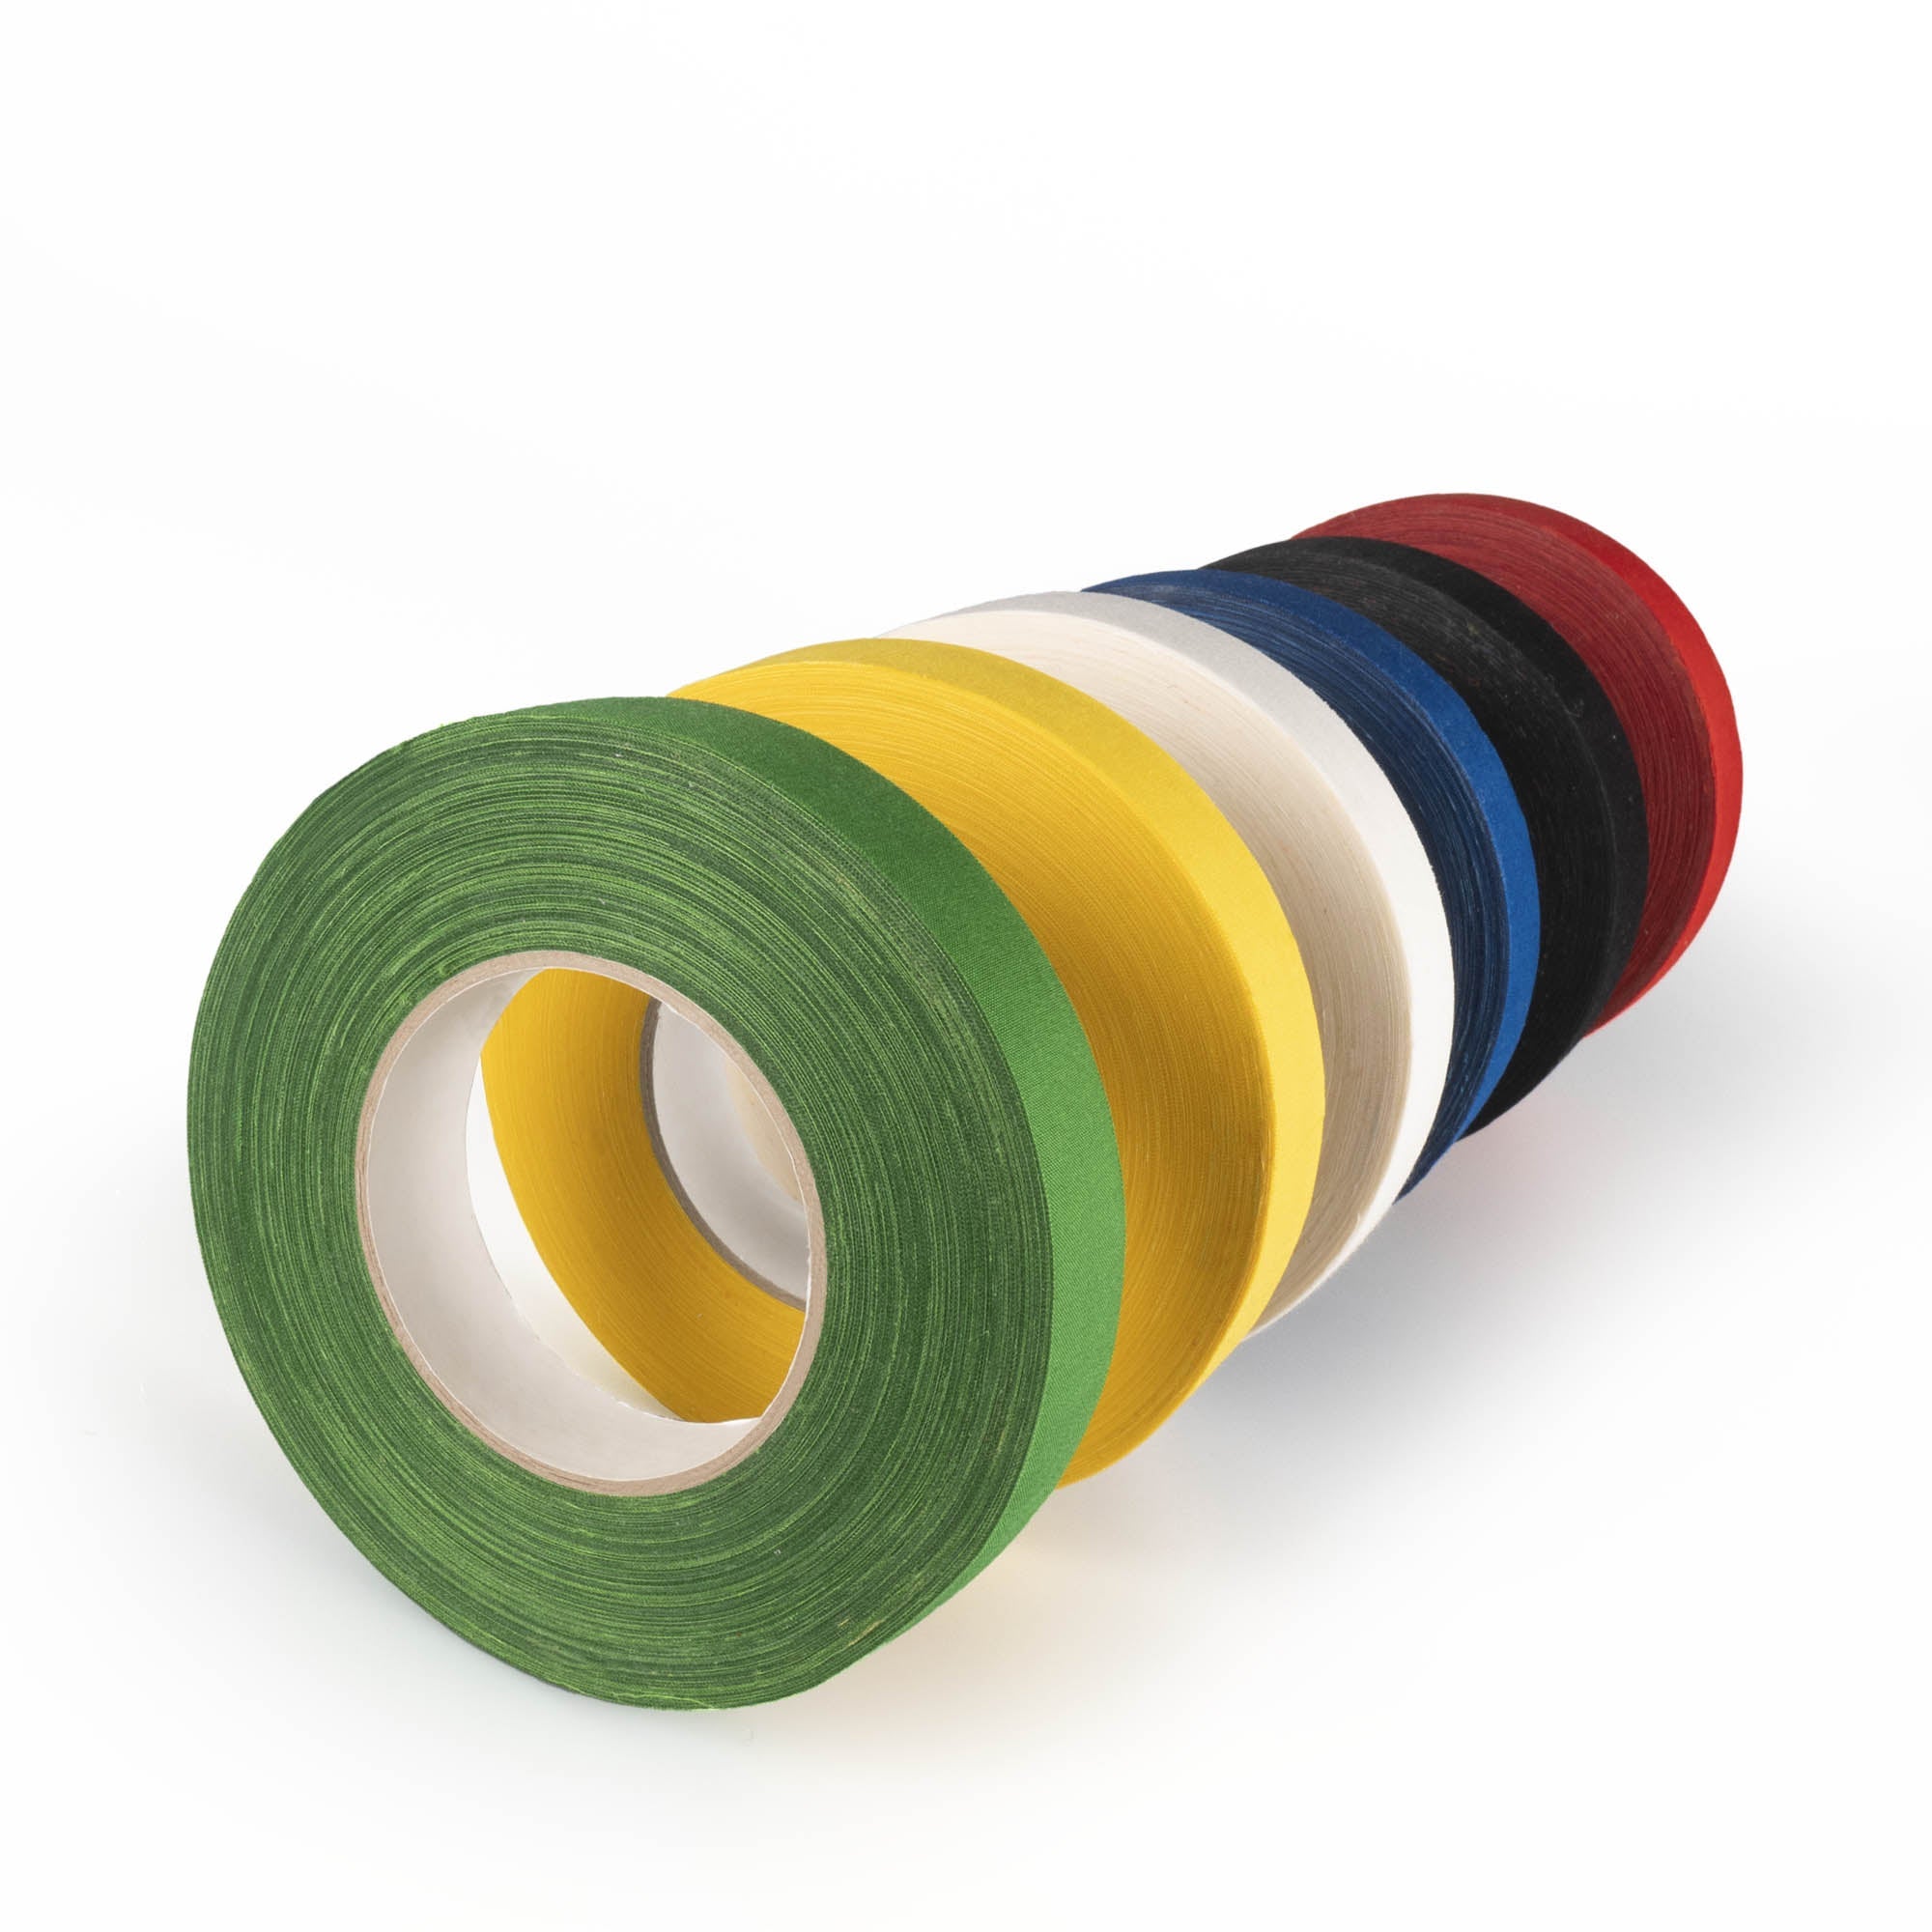 a row of 2.5cm wide tape